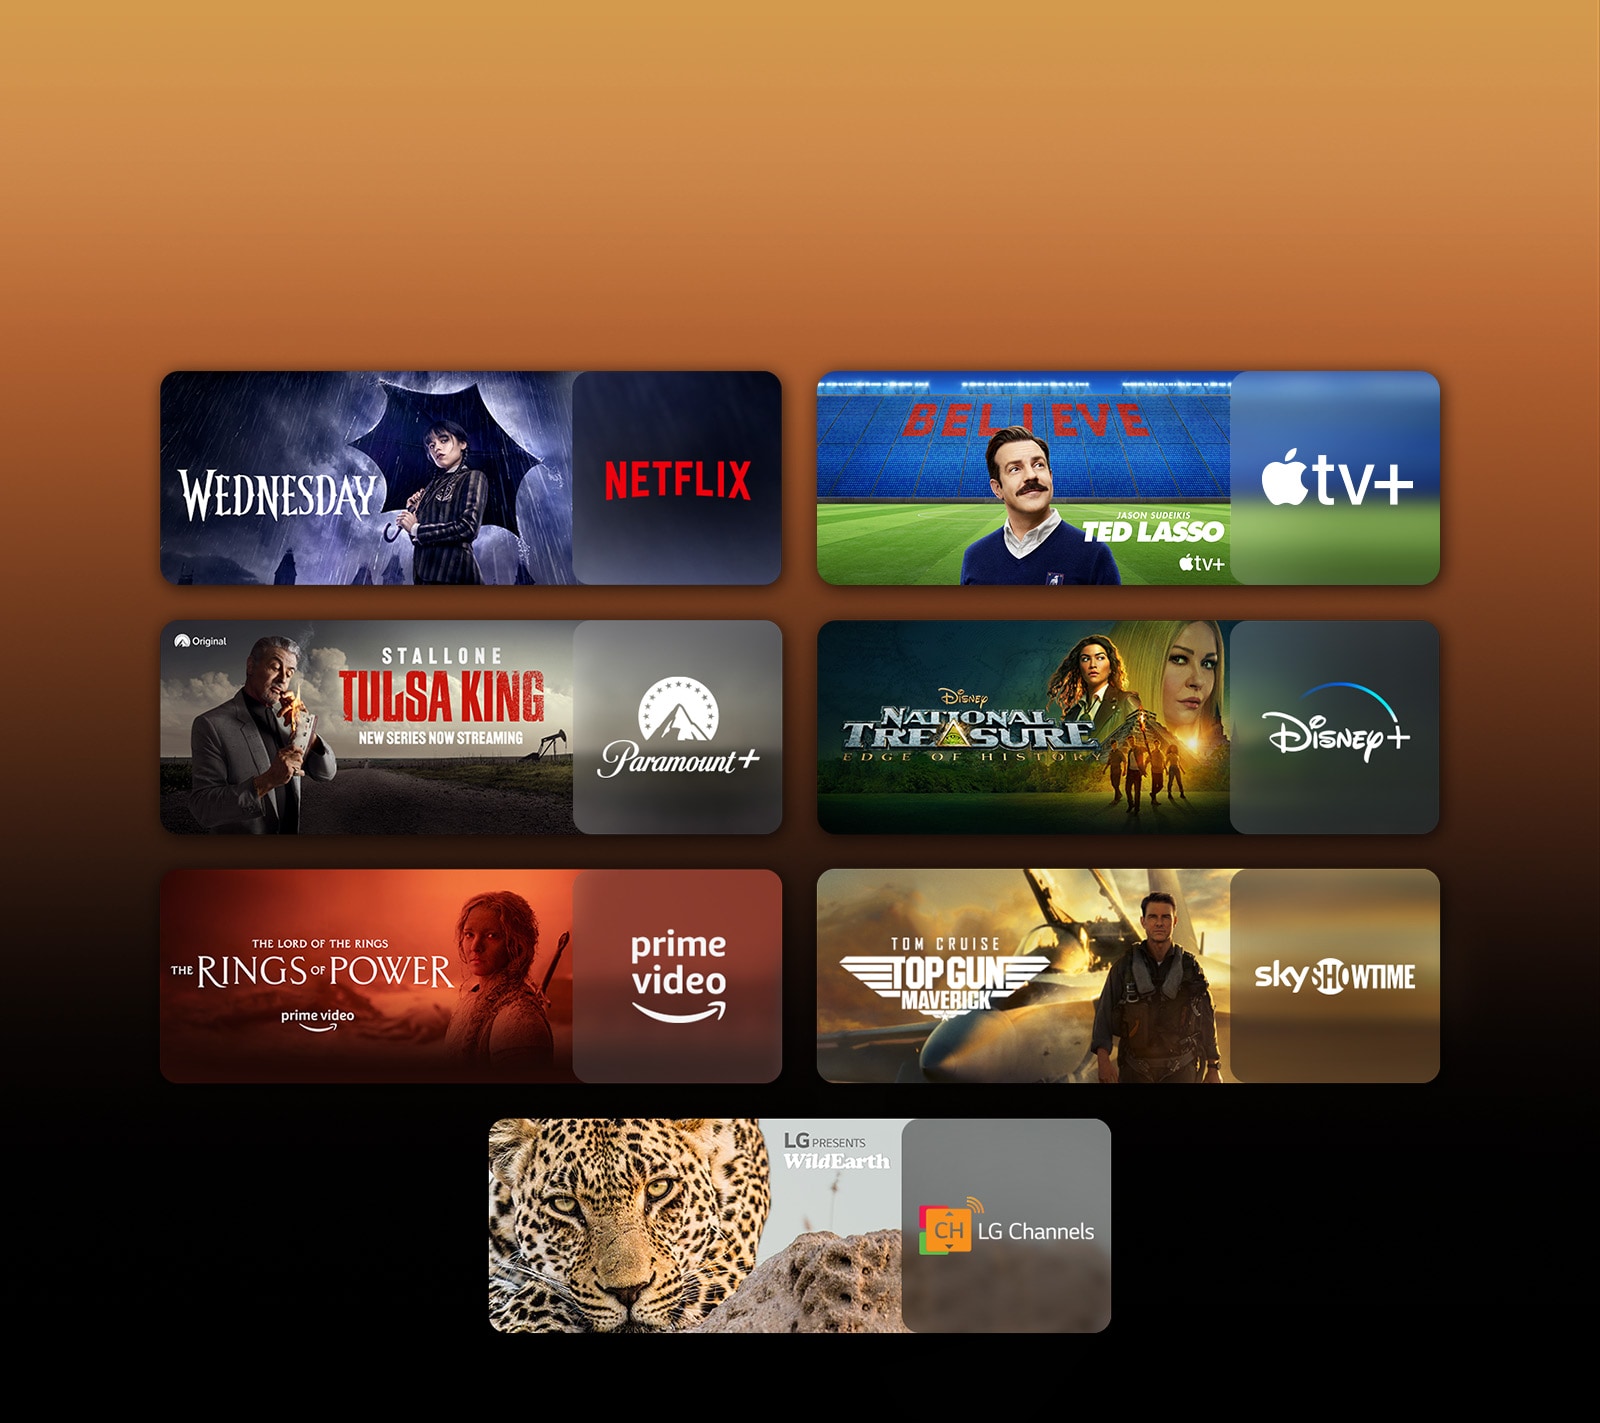 There are streaming service logos and matching images next to each logo. There are pictures of Wednesday from Netflix, TED LASSO from Apple TV, Tulsa King from Paramount+, National Treasure from Disney Plus, The Rings of Power from PRIME VIDEO, TOP GUN from Sky Showtime and LG CHANNEL's Leopard.